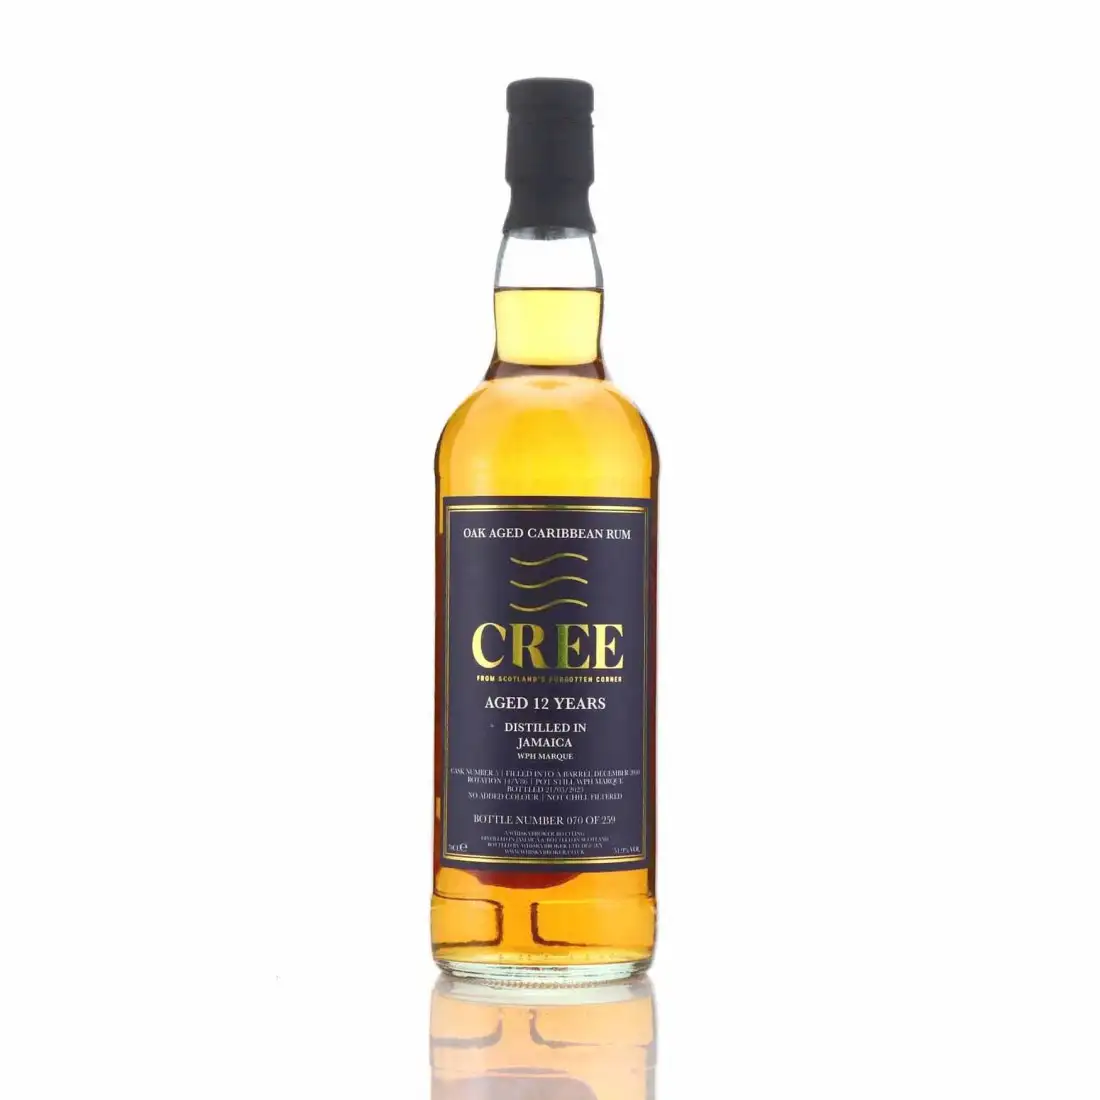 Image of the front of the bottle of the rum Cree (Oak Aged Caribbean Rum) WPH